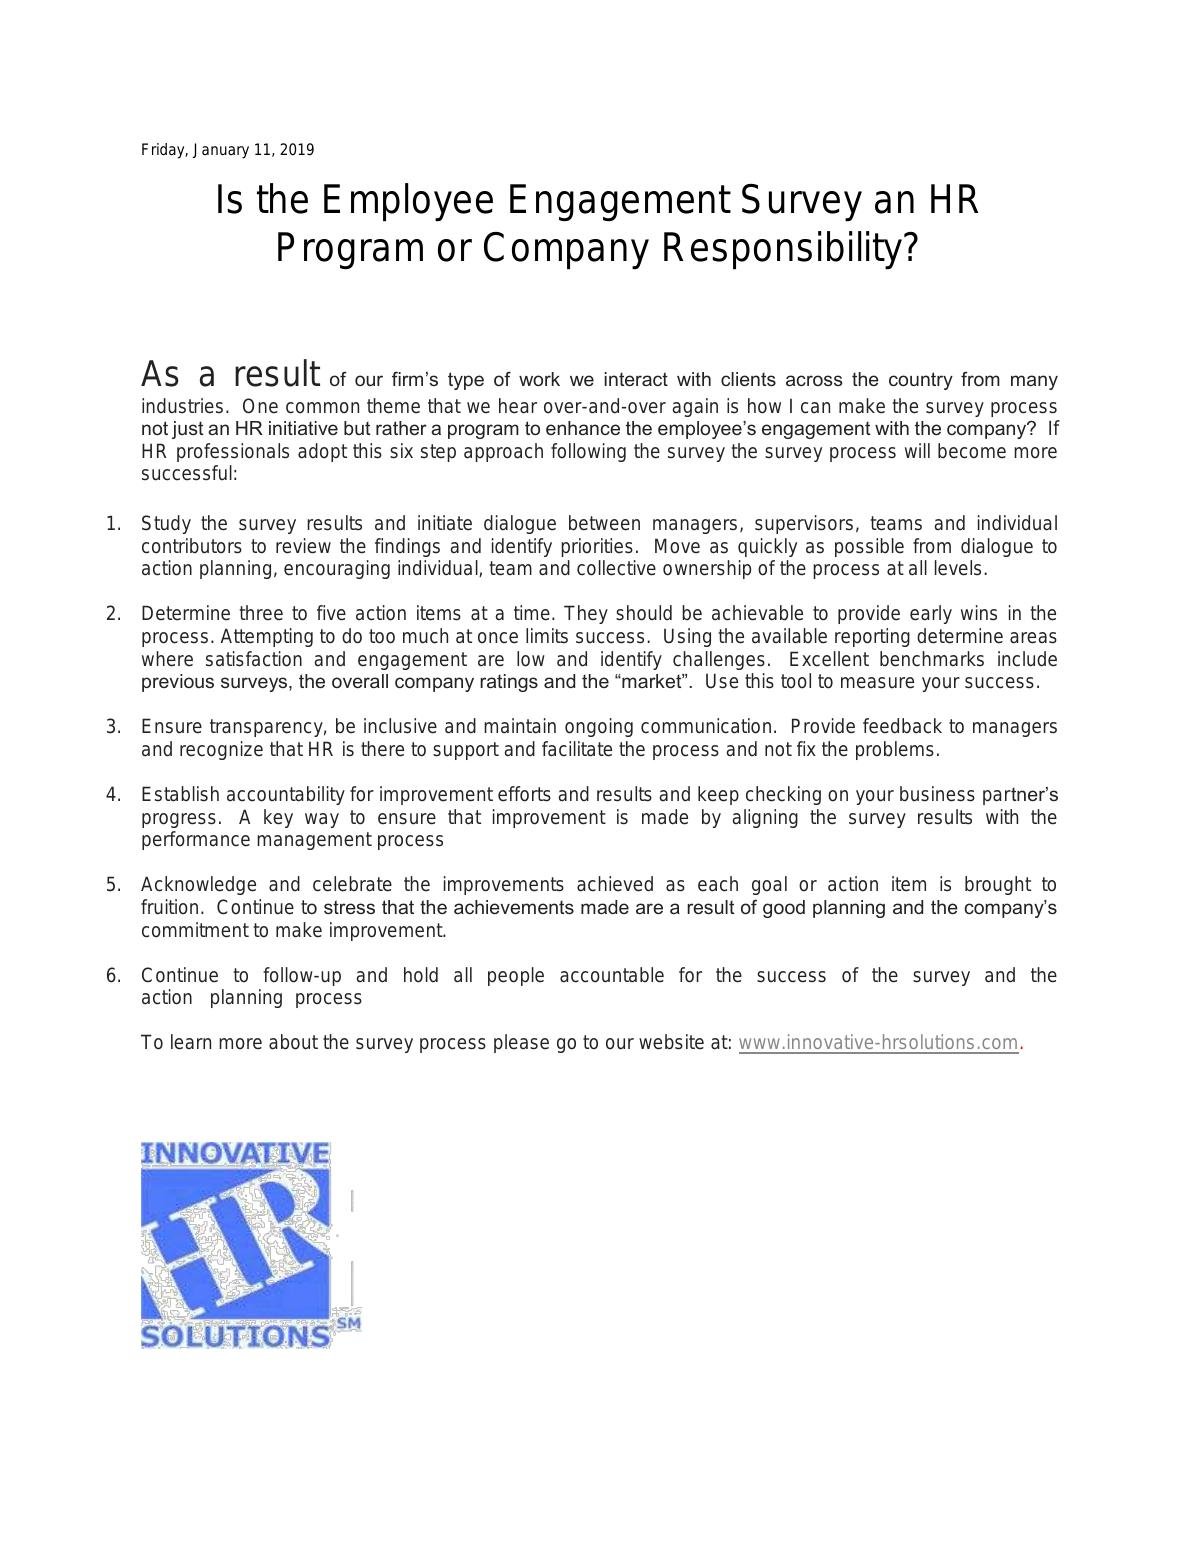 Is the Employee Engagement Survey an HR Program or Company Responsibility?